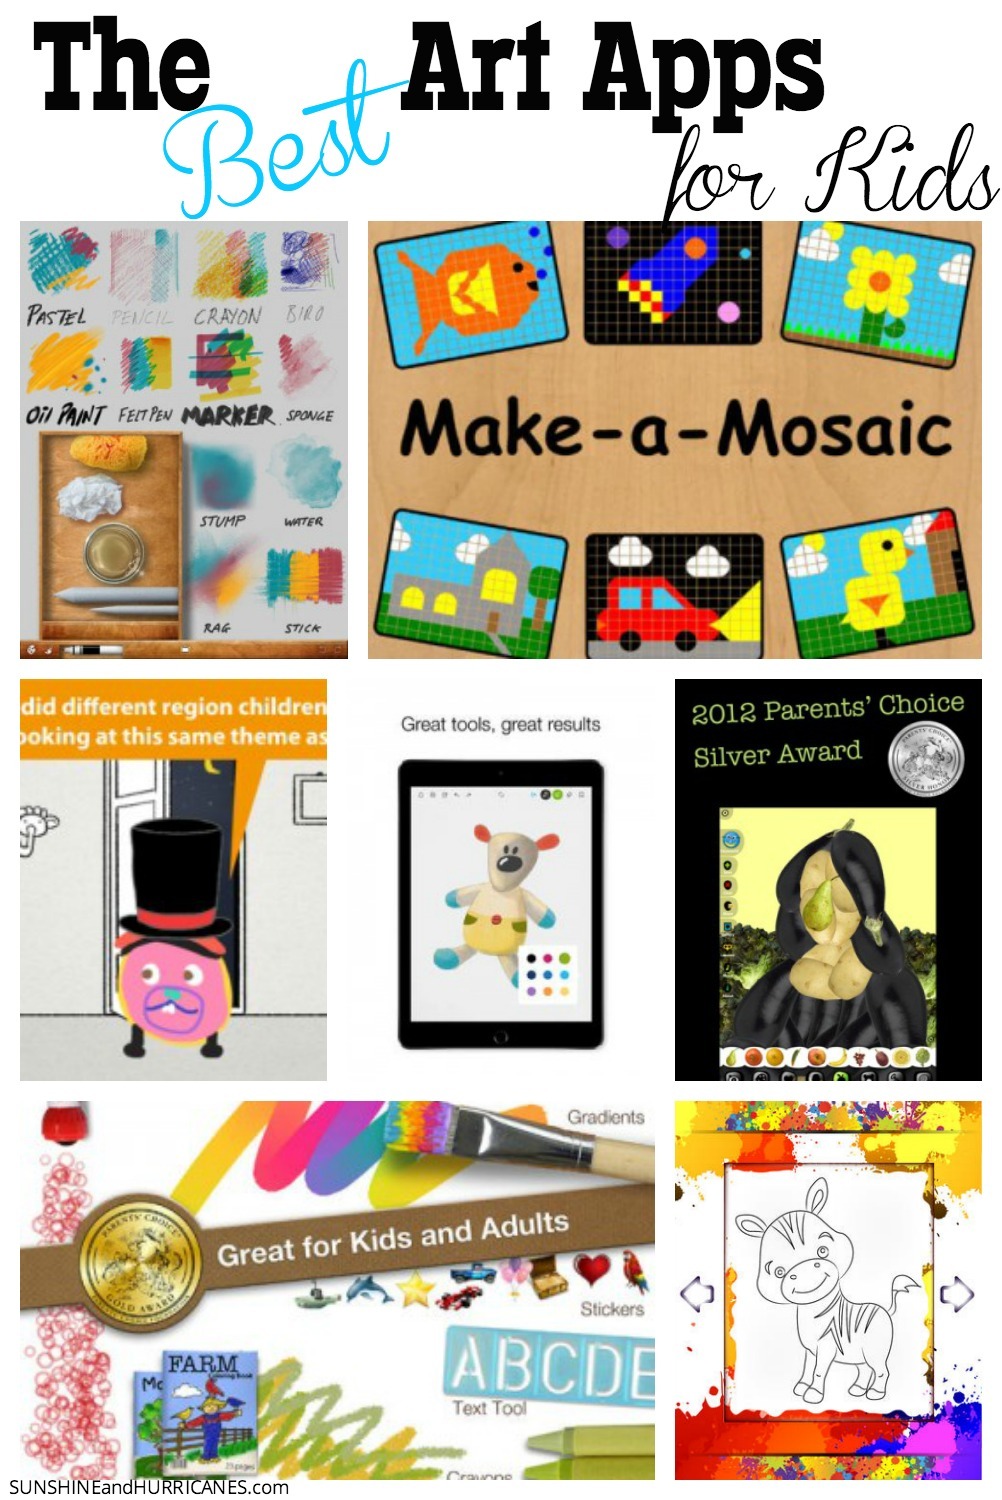 Do you have a child who loves to express themselves through art? There are so many great ways to encourage their creative spirits, even when there isn't time for a mess or you are on the go. You'll find all the inspiration your little artist needs in these fun and engaging Best Art Apps for Kids. SunshineandHurricanes.com